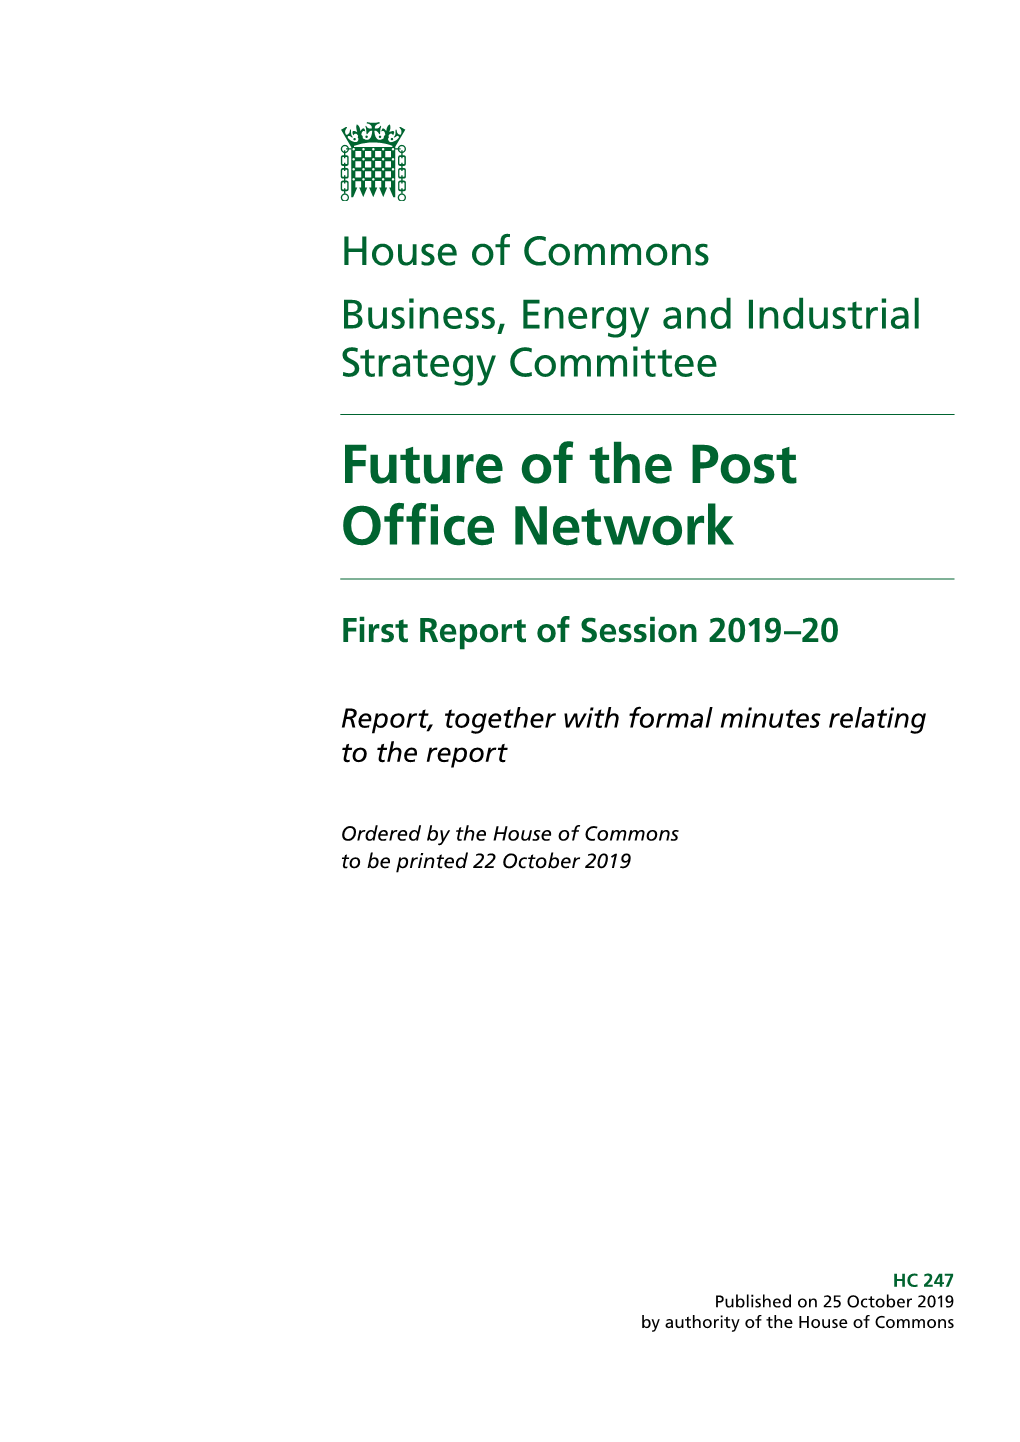 Future of the Post Office Network